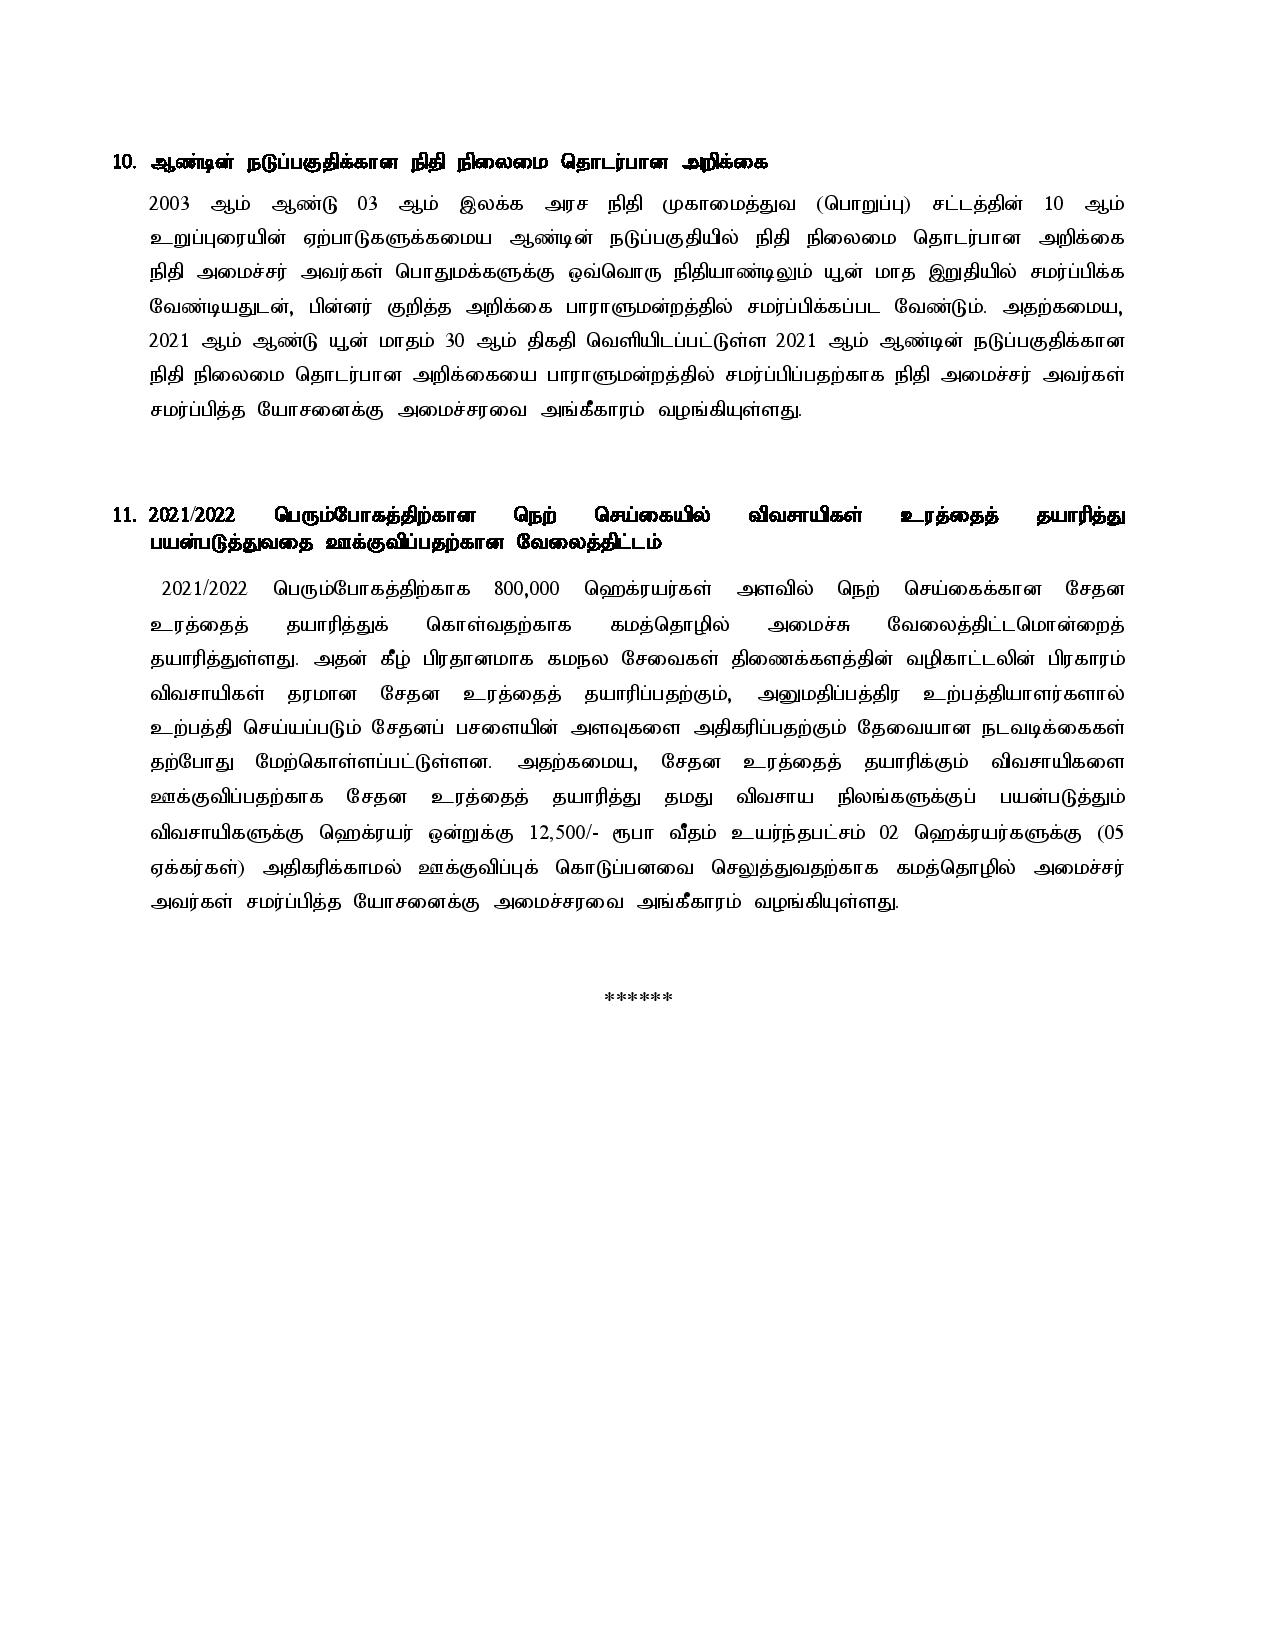 Cabinet Decision on 12.07.2021 Tamil page 005